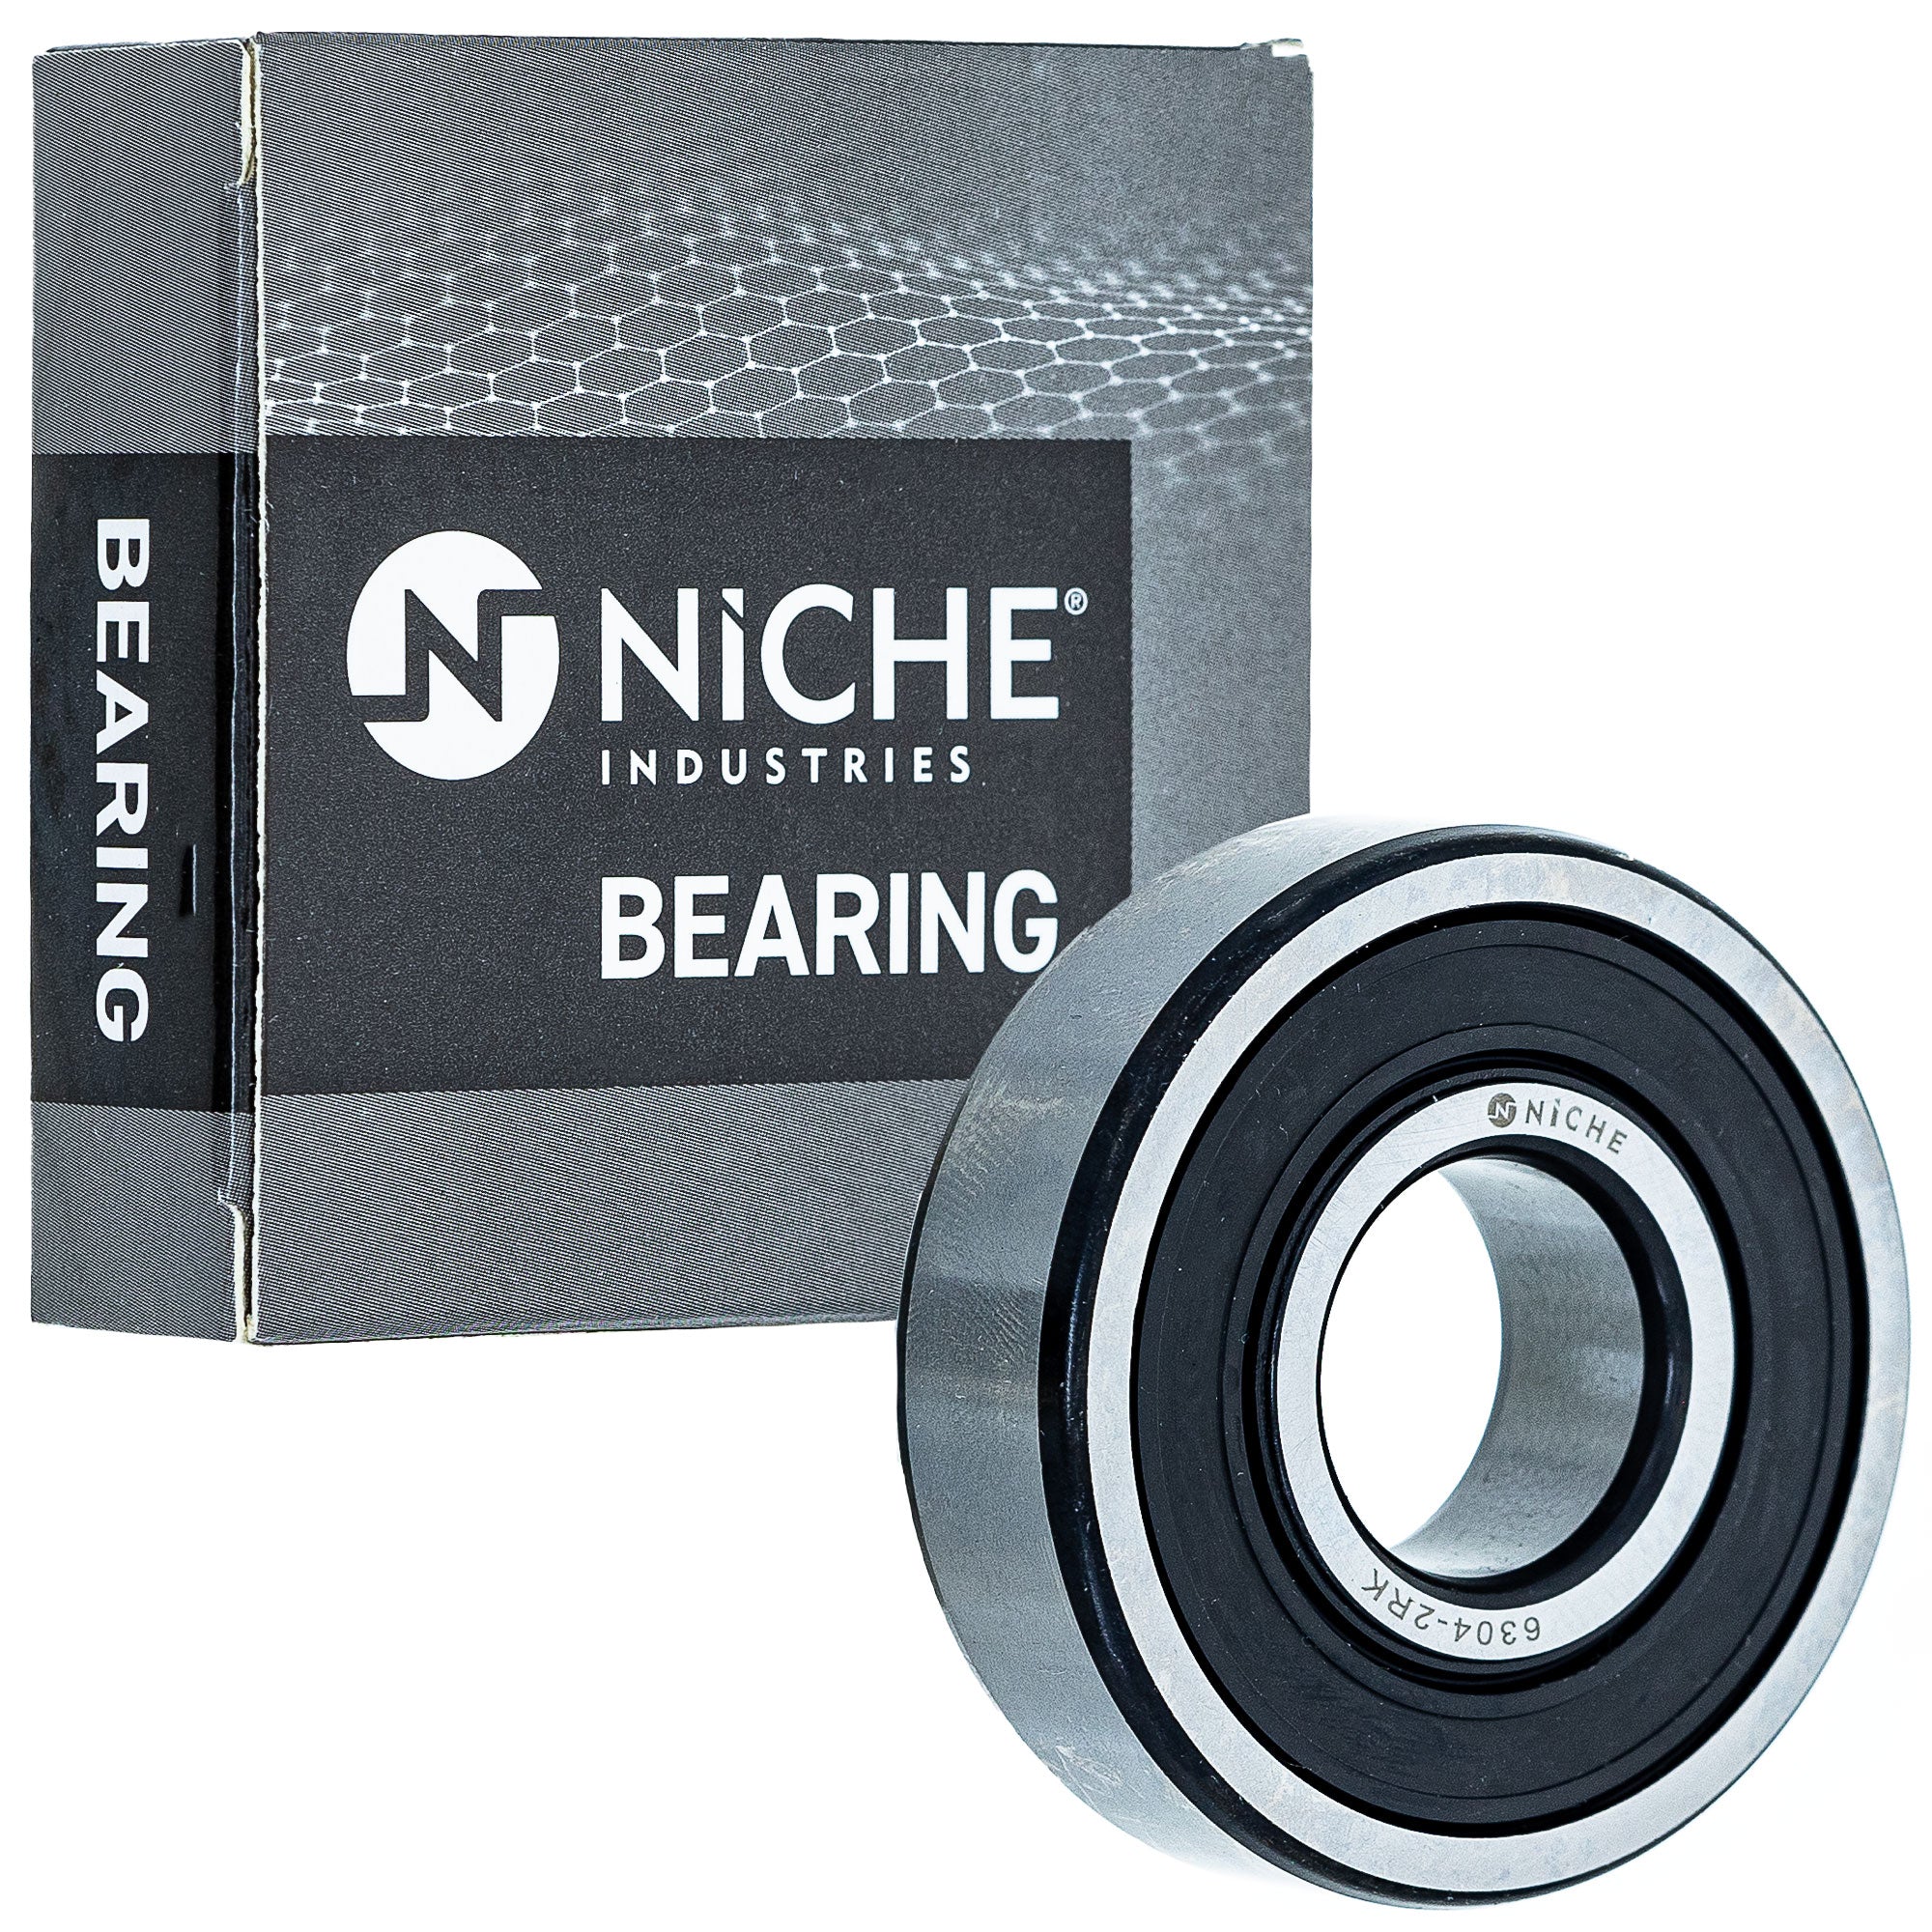 NICHE 519-CBB2343R Bearing & Seal Kit 2-Pack for zOTHER VTX1800T3